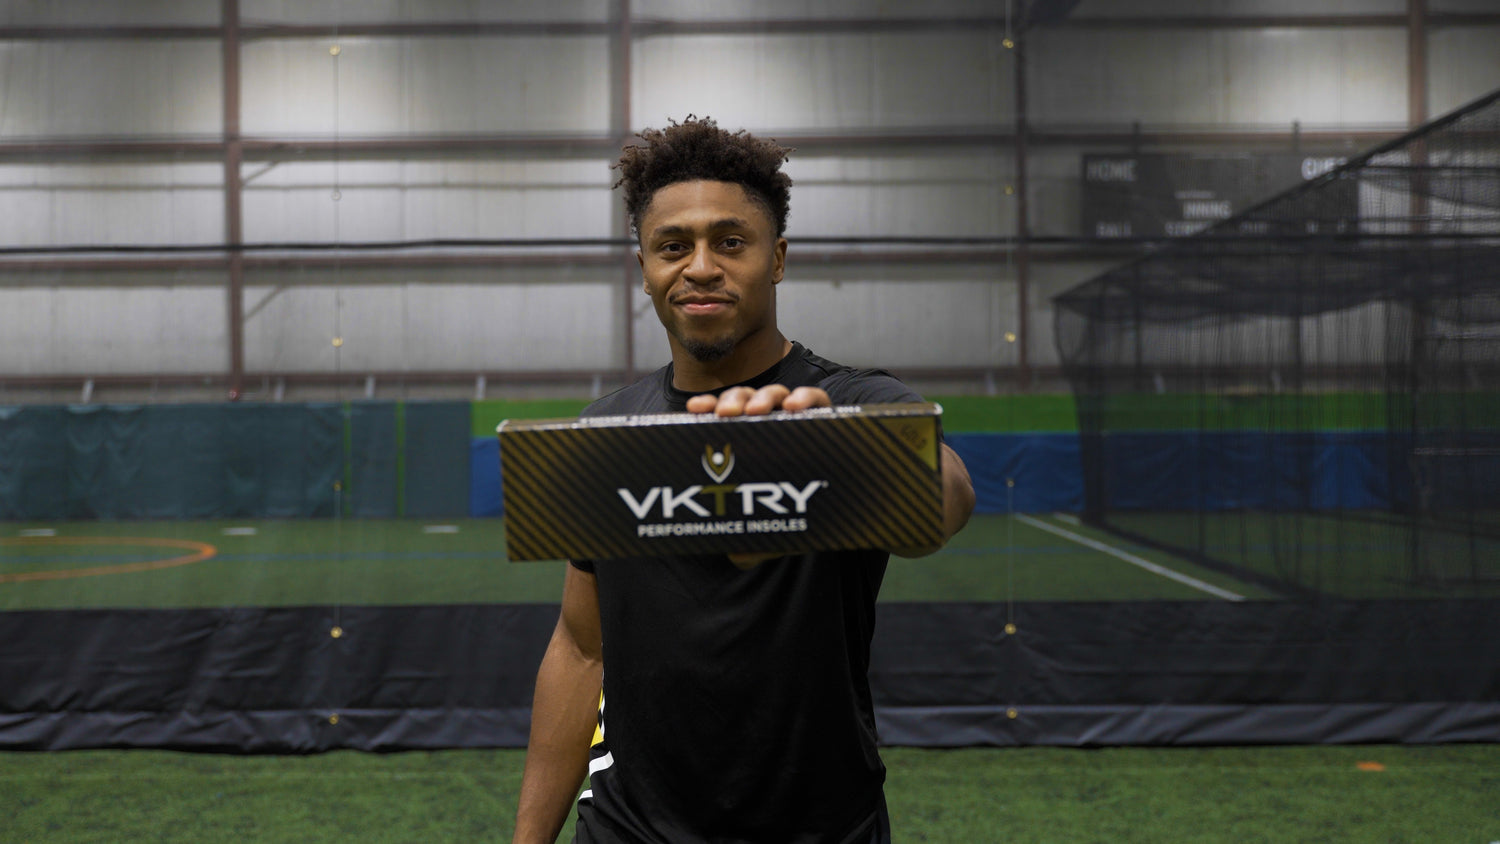 Run faster, explode off the line quicker, and protect from injury with VKTRY Insoles for Football